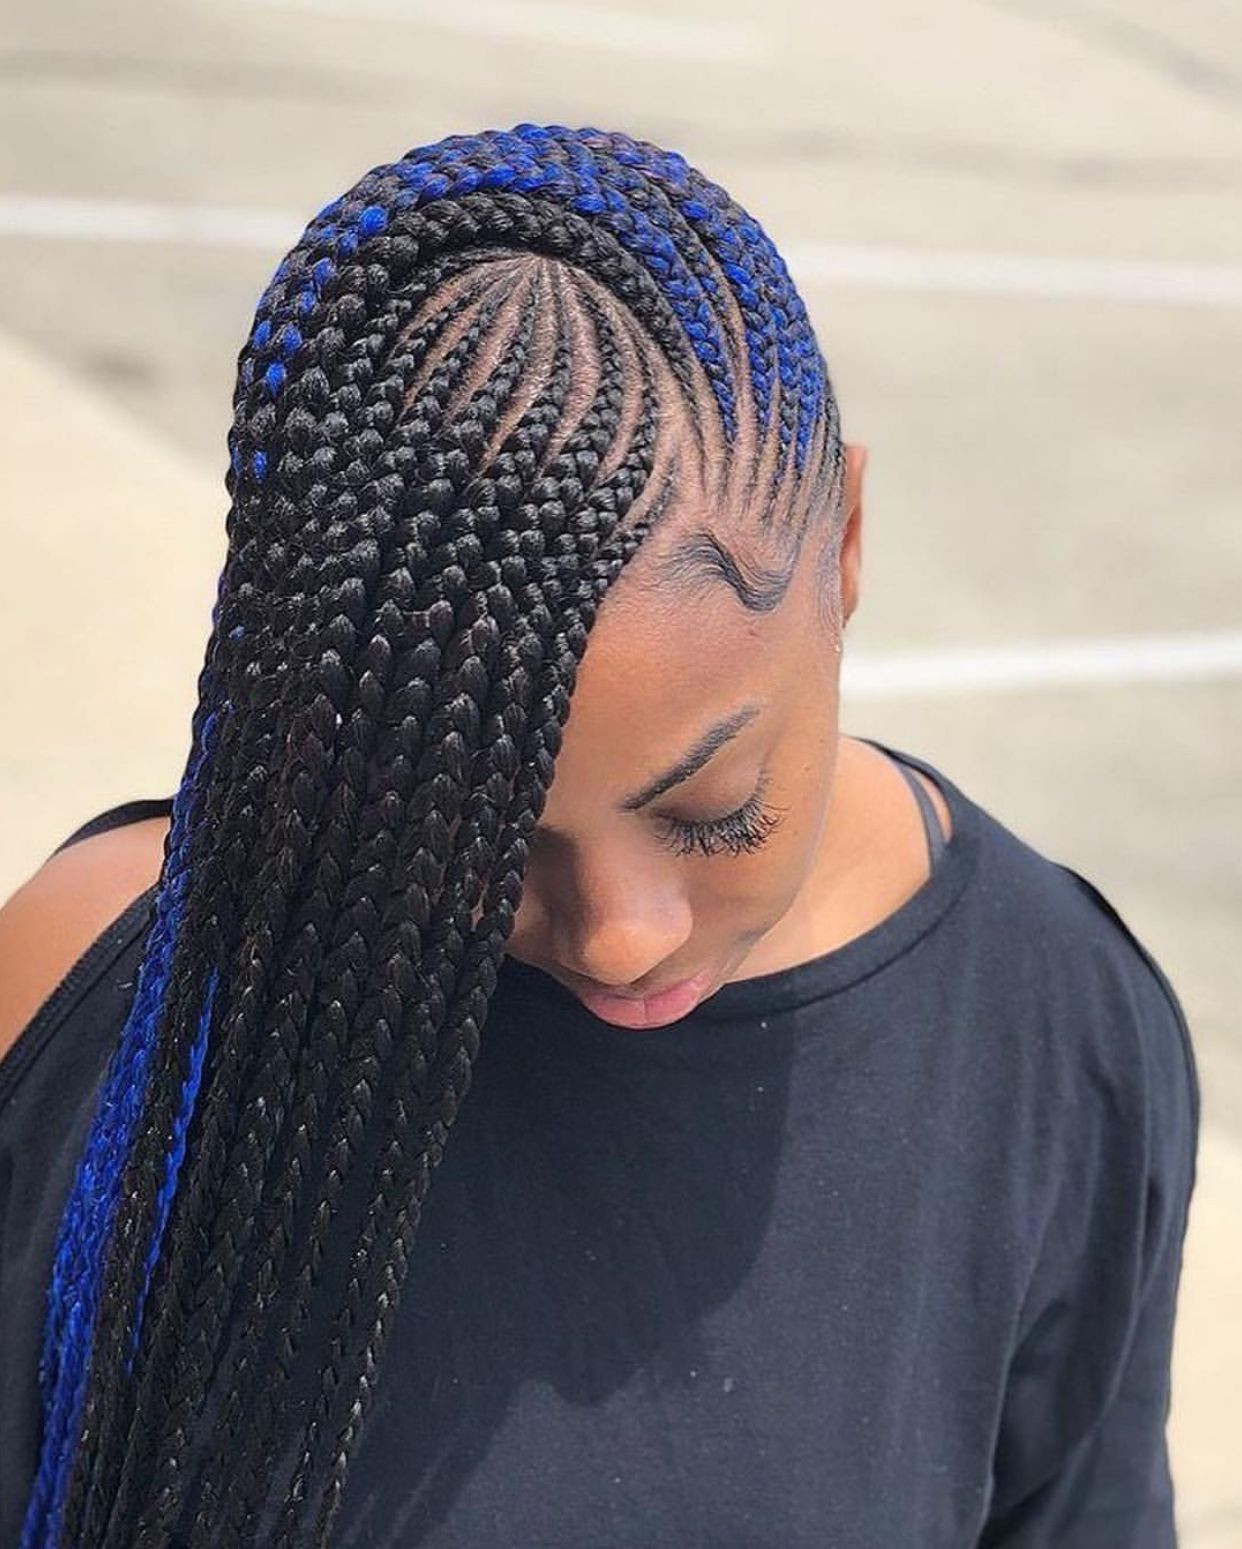 Hairstyle Braids
 35 Lemonade Braids Styles for Elegant Protective Styling